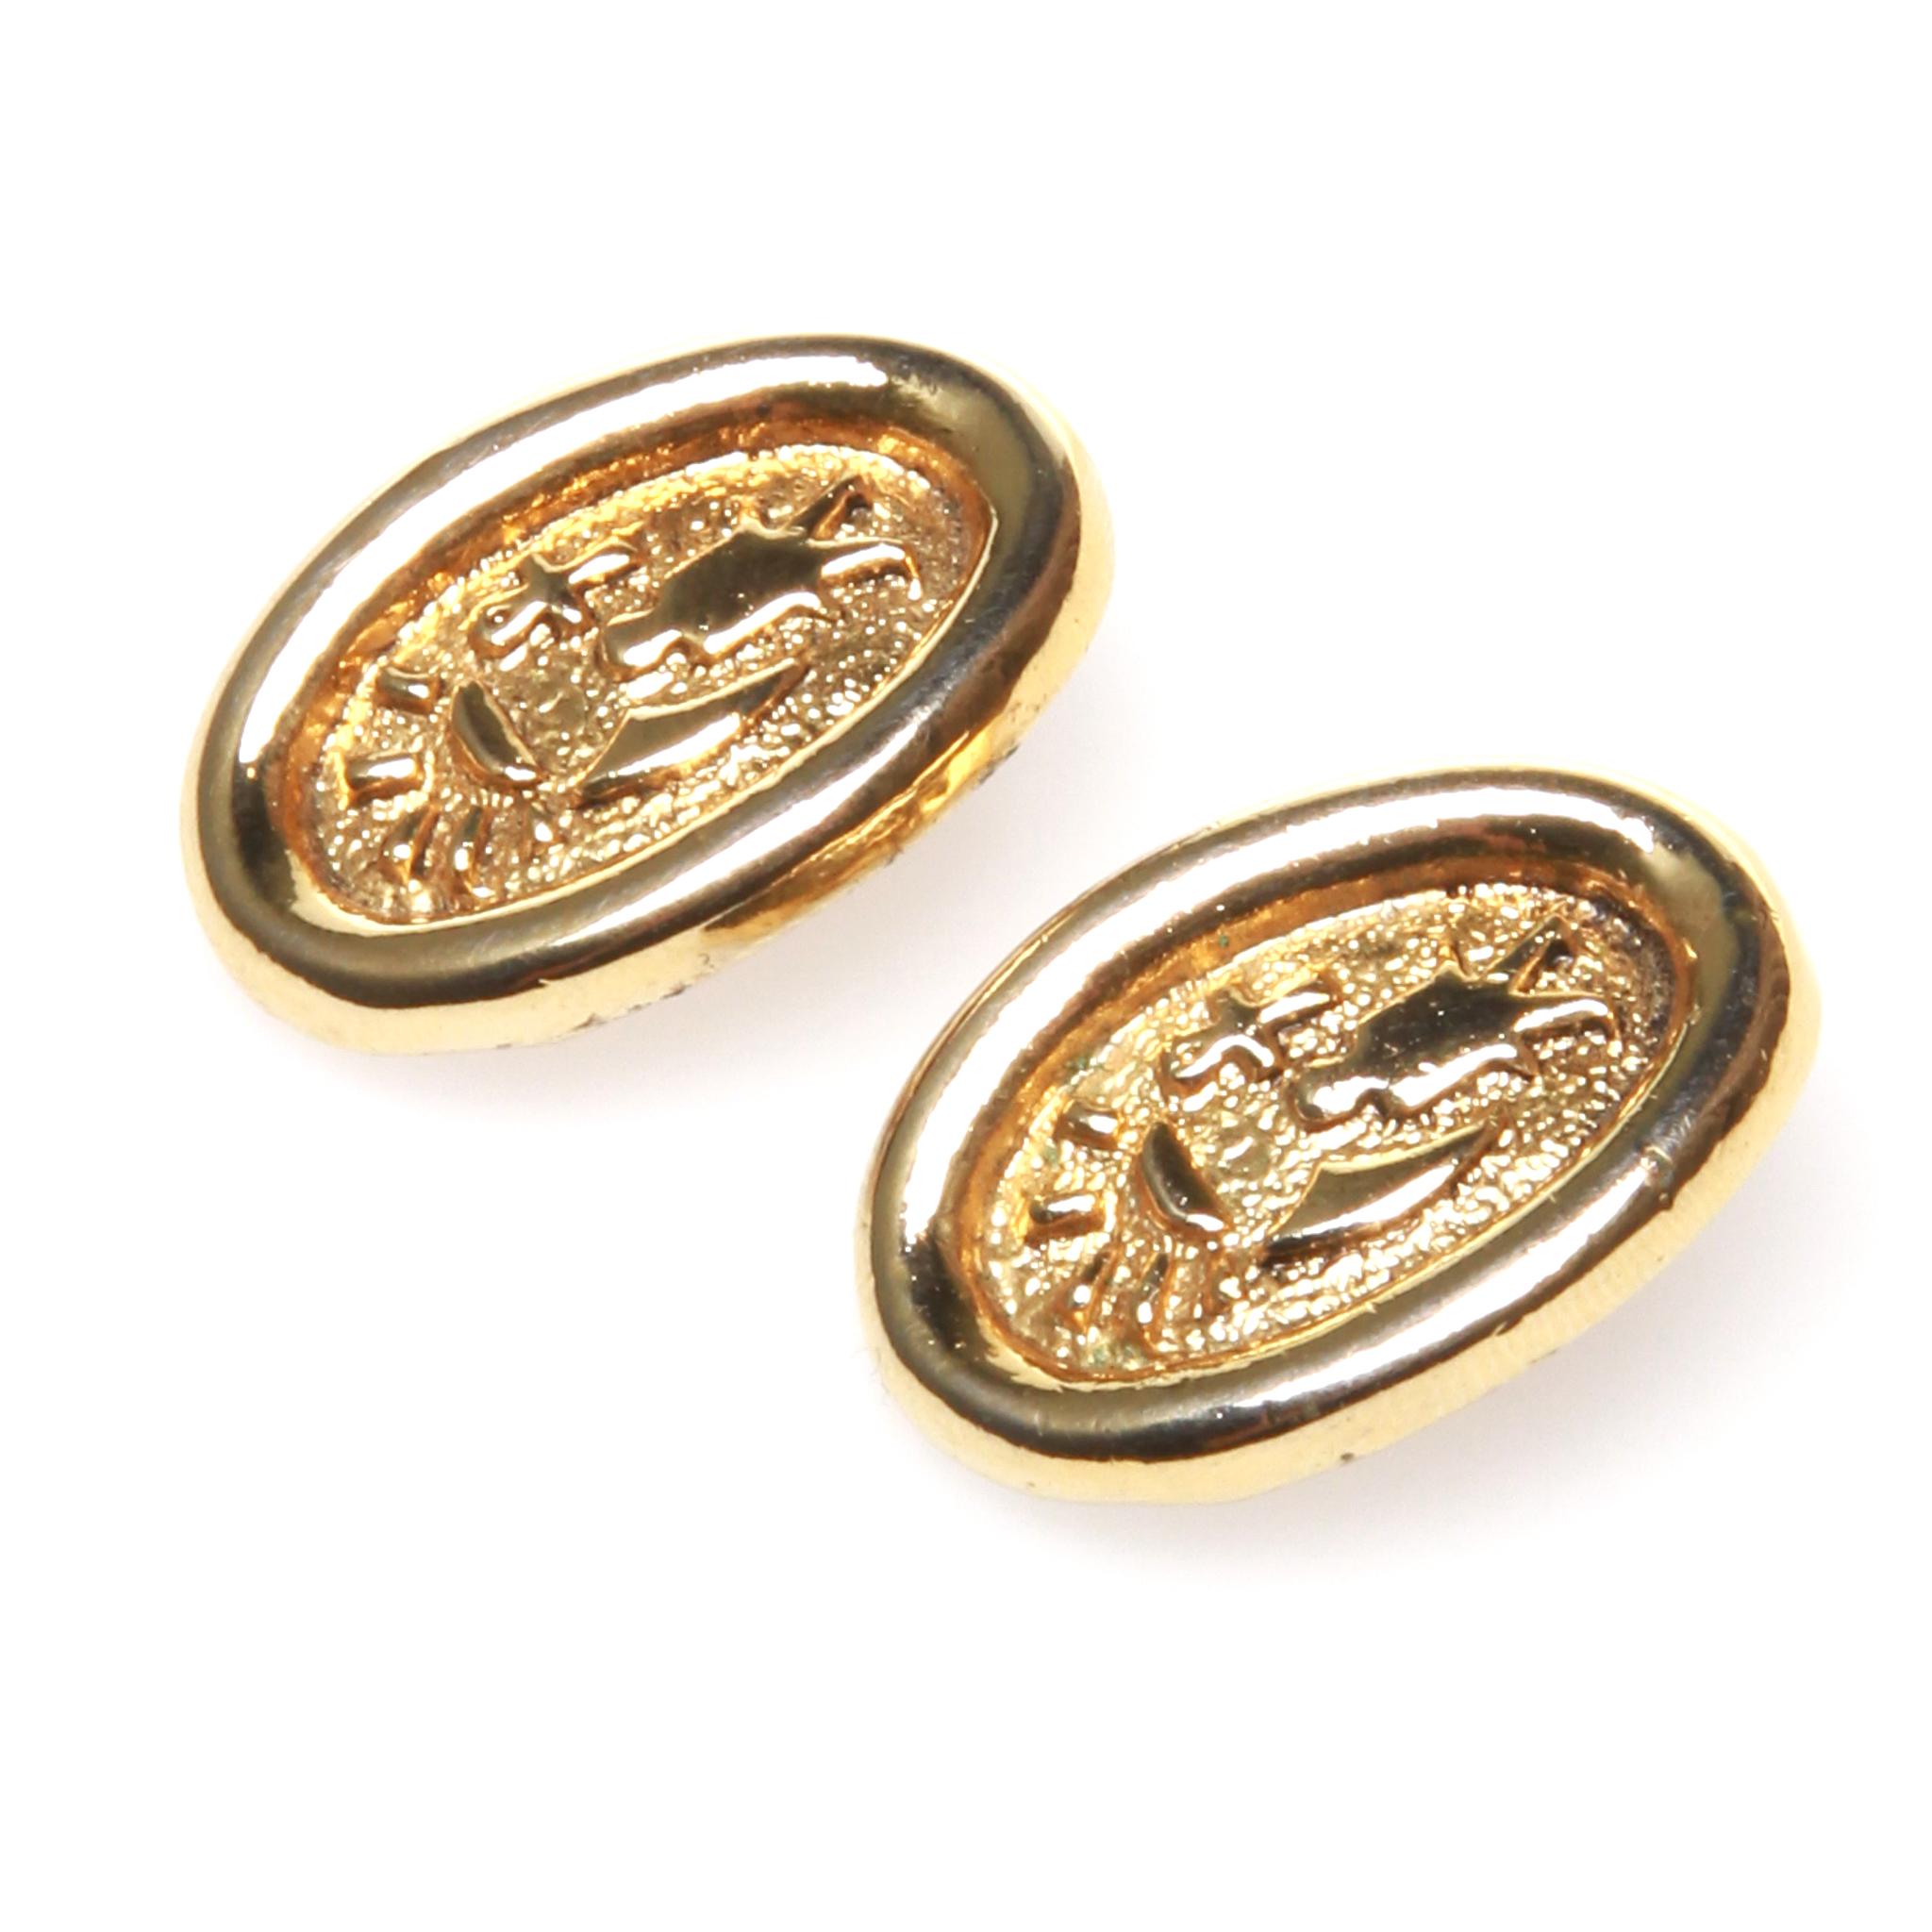 Vintage gold clip on earrings In Good Condition For Sale In Melbourne, Victoria